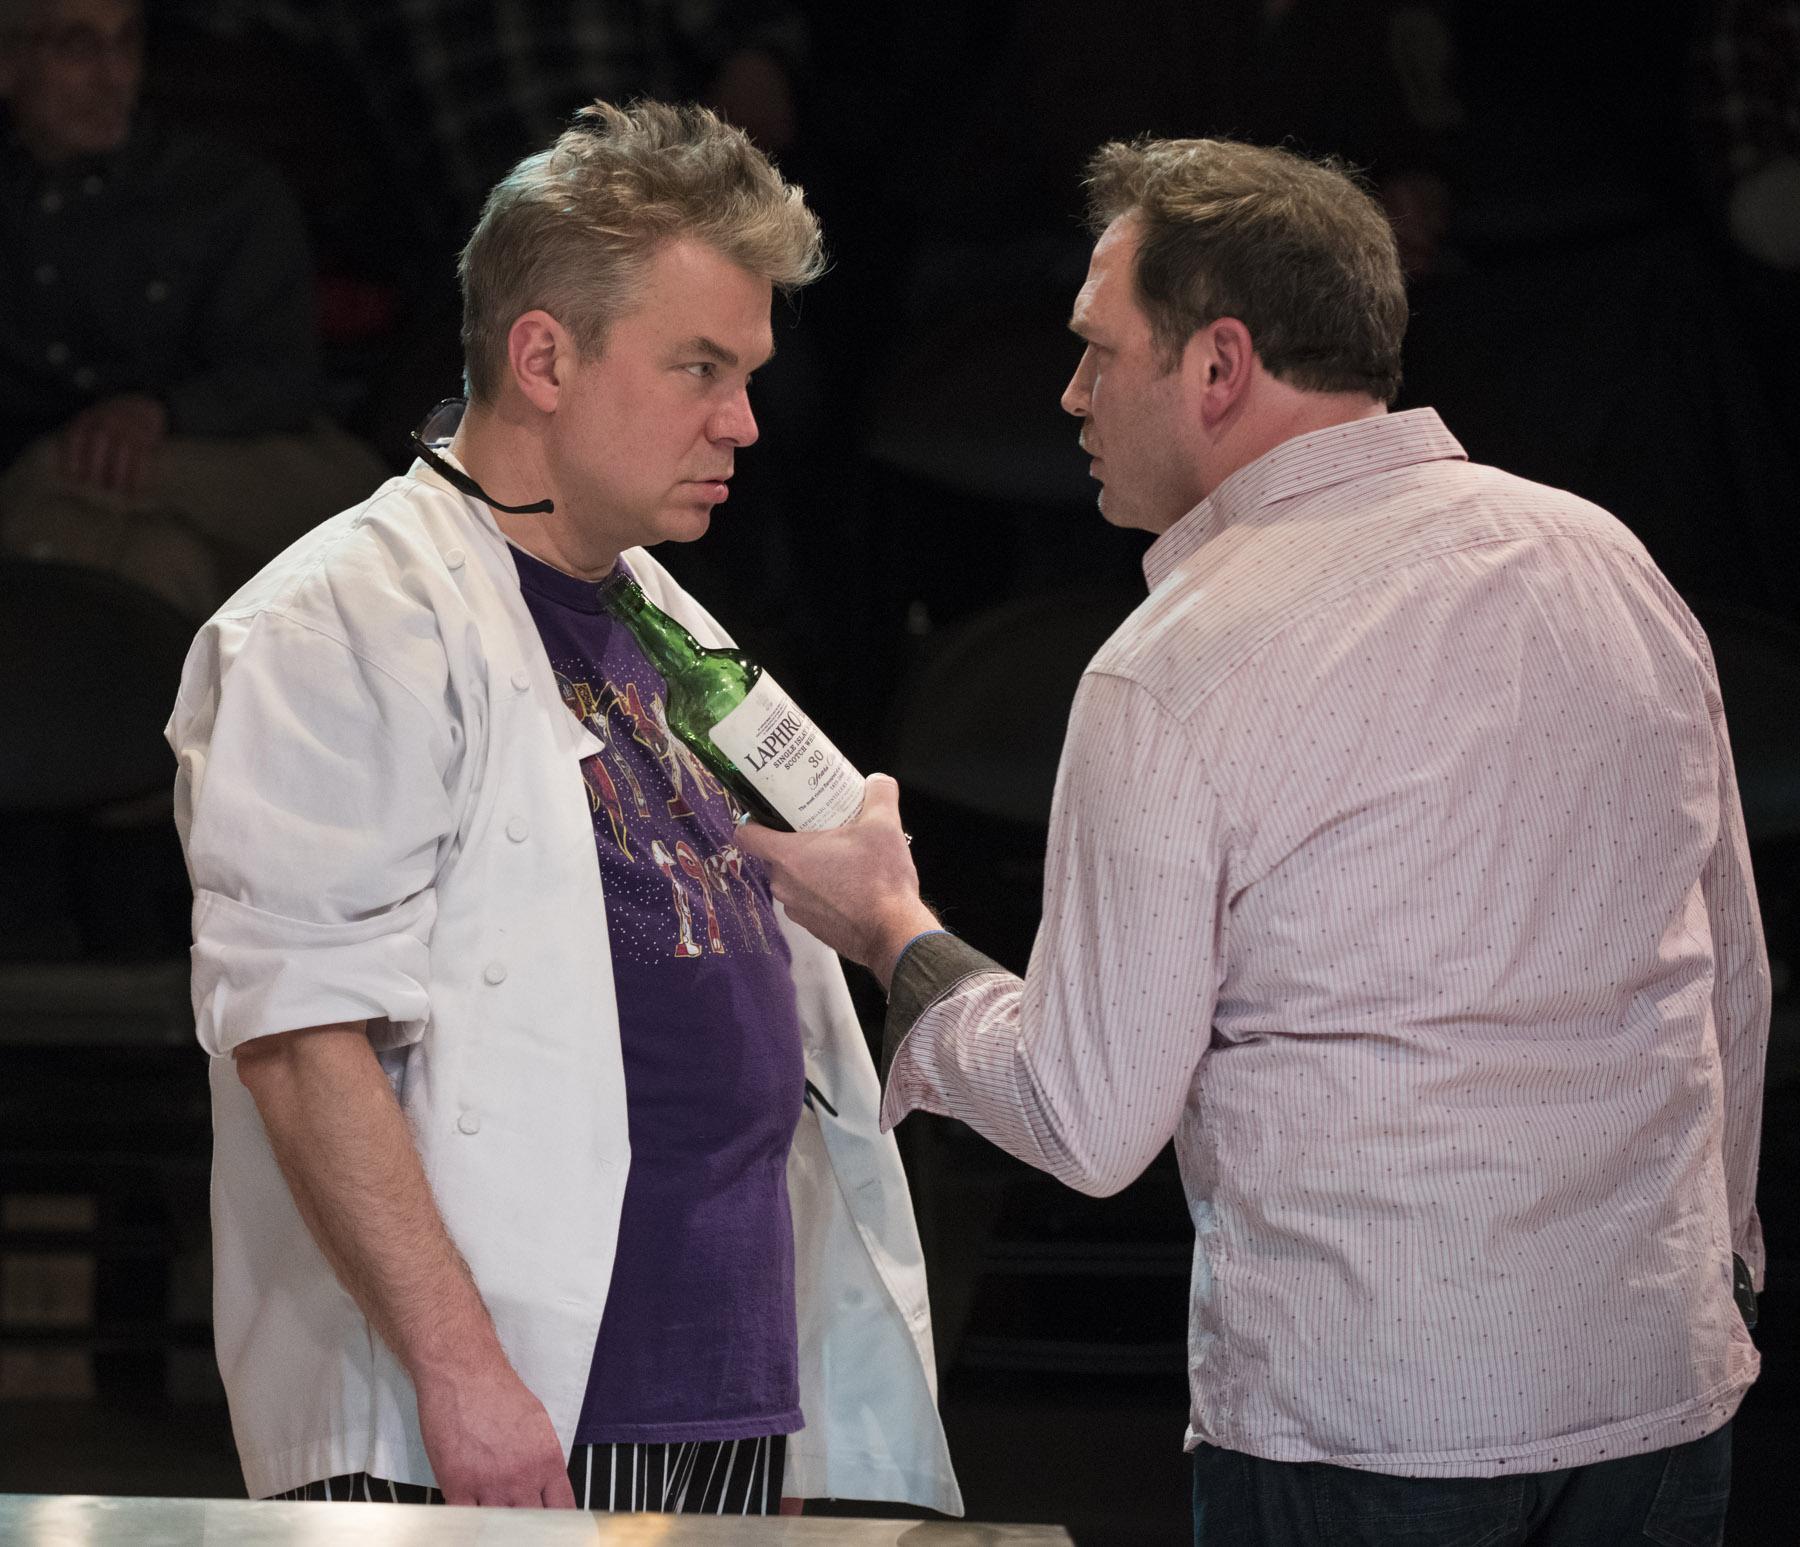 Peter DeFaria, left, and Brad Woodard in “How to Use a Knife.” (Photo by Michael Brosilow)